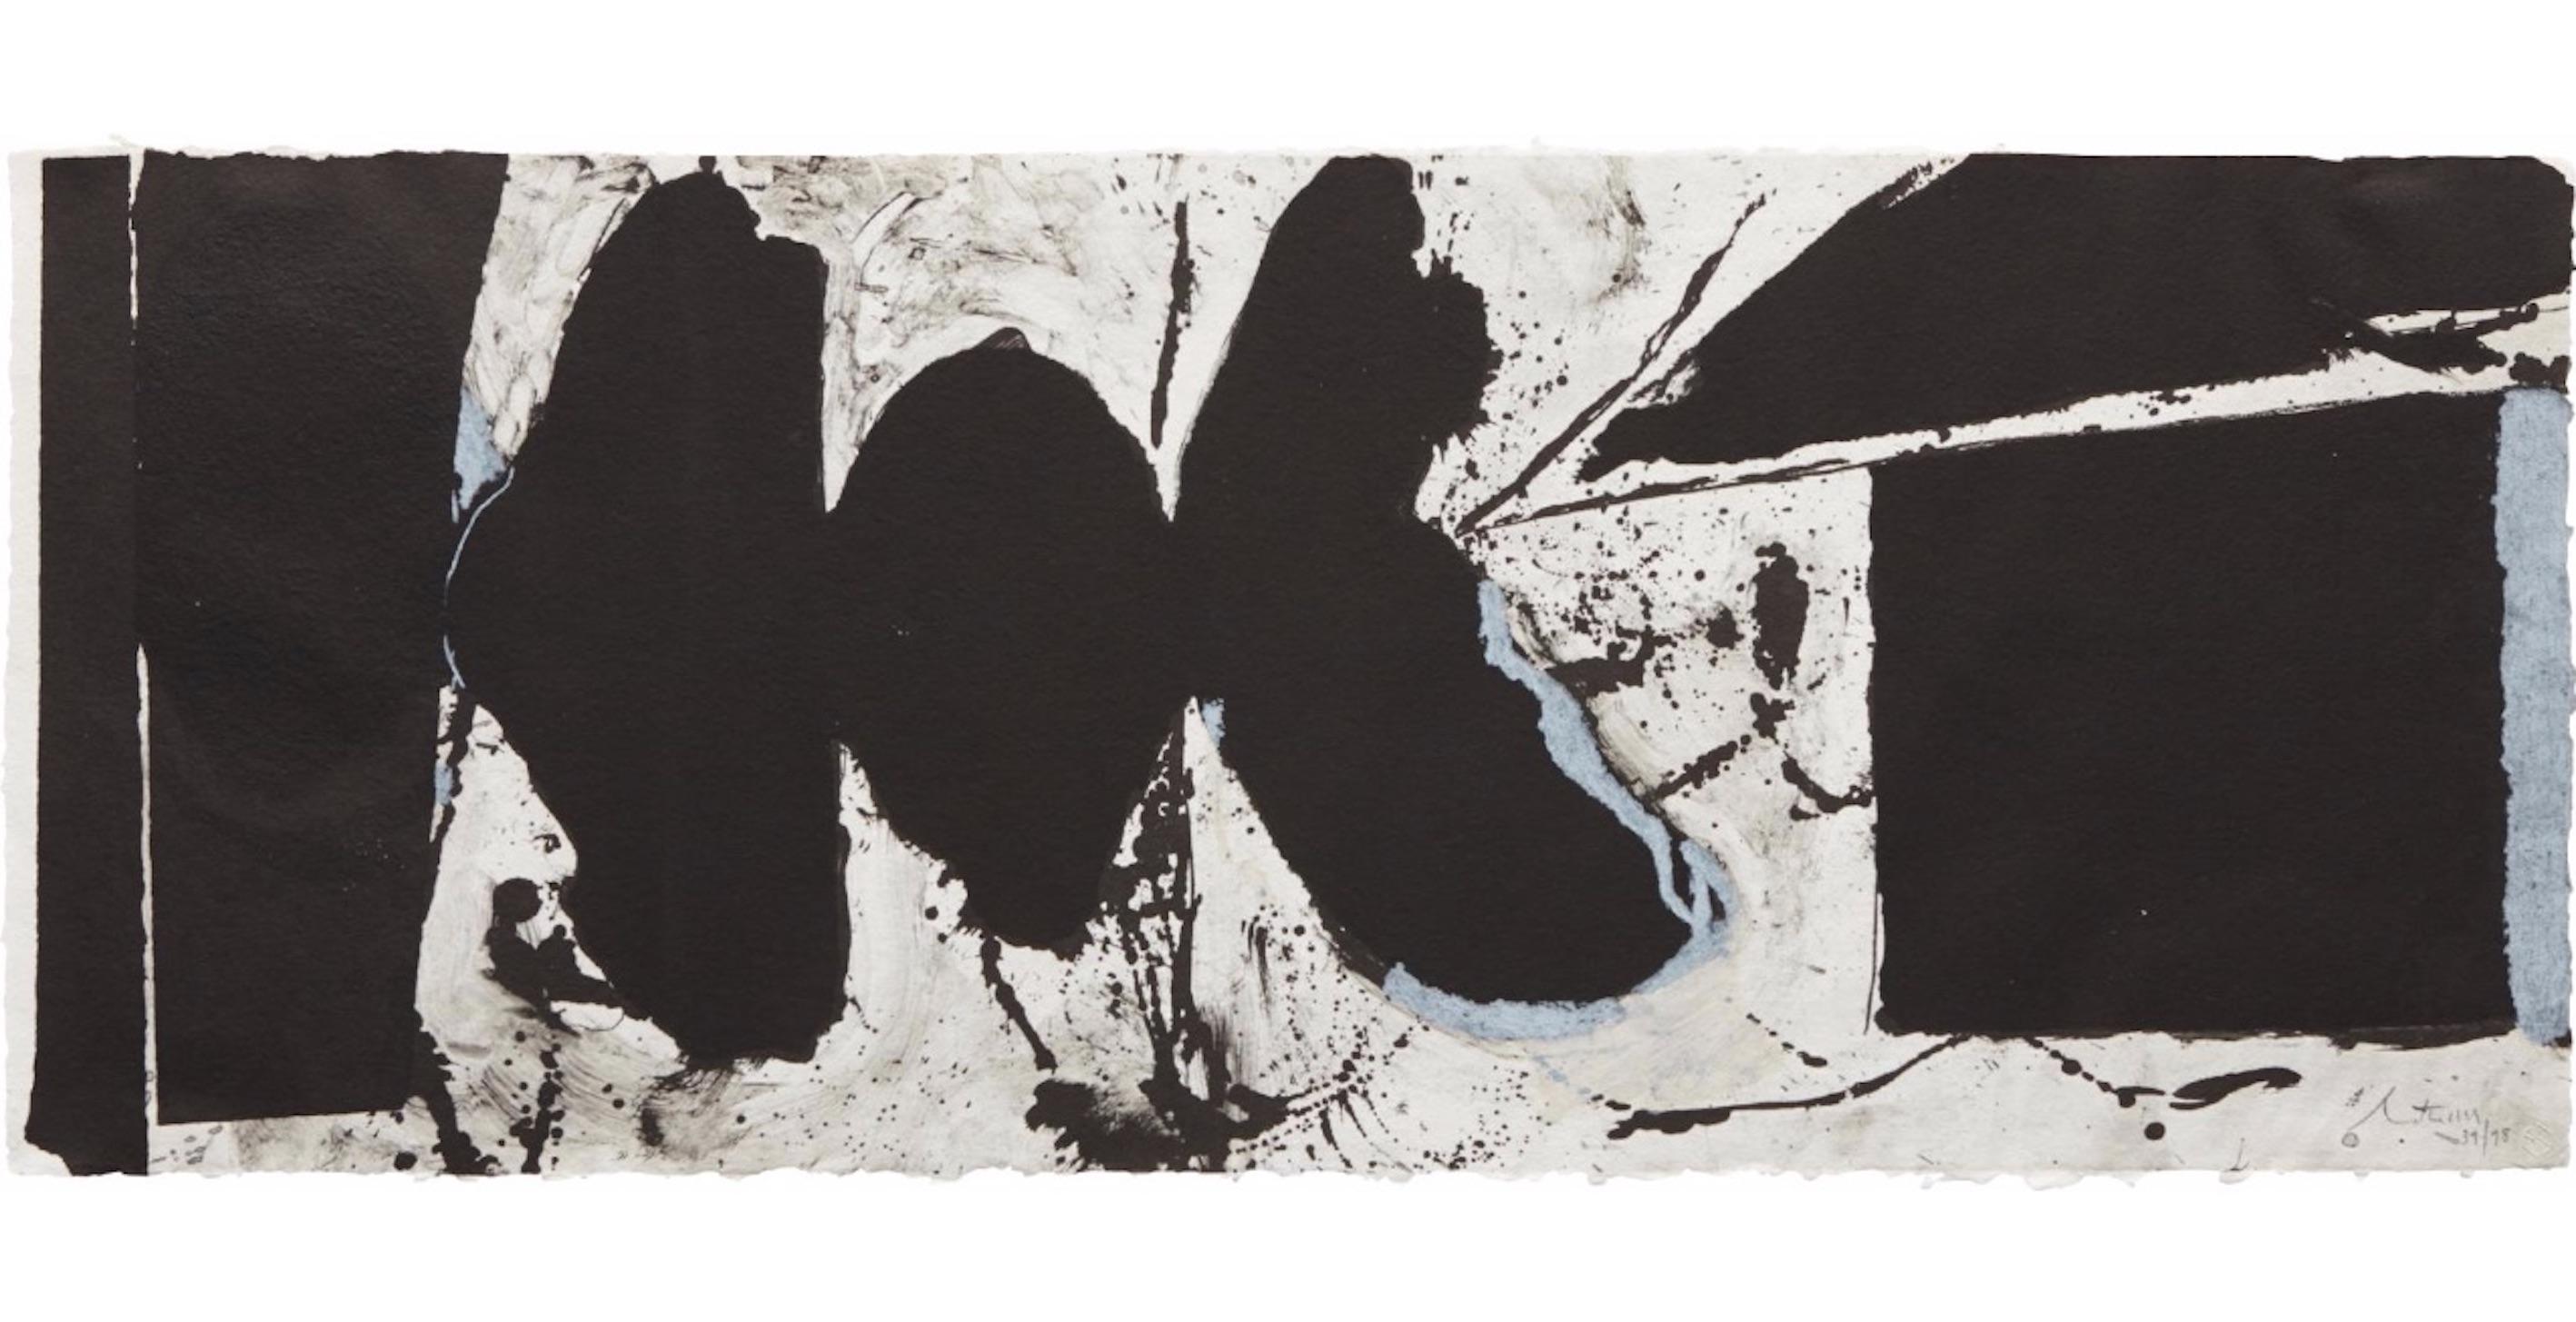 Robert Motherwell Abstract Print - Elegy Black Black, a beautiful lithography from Motherwell's elegy series